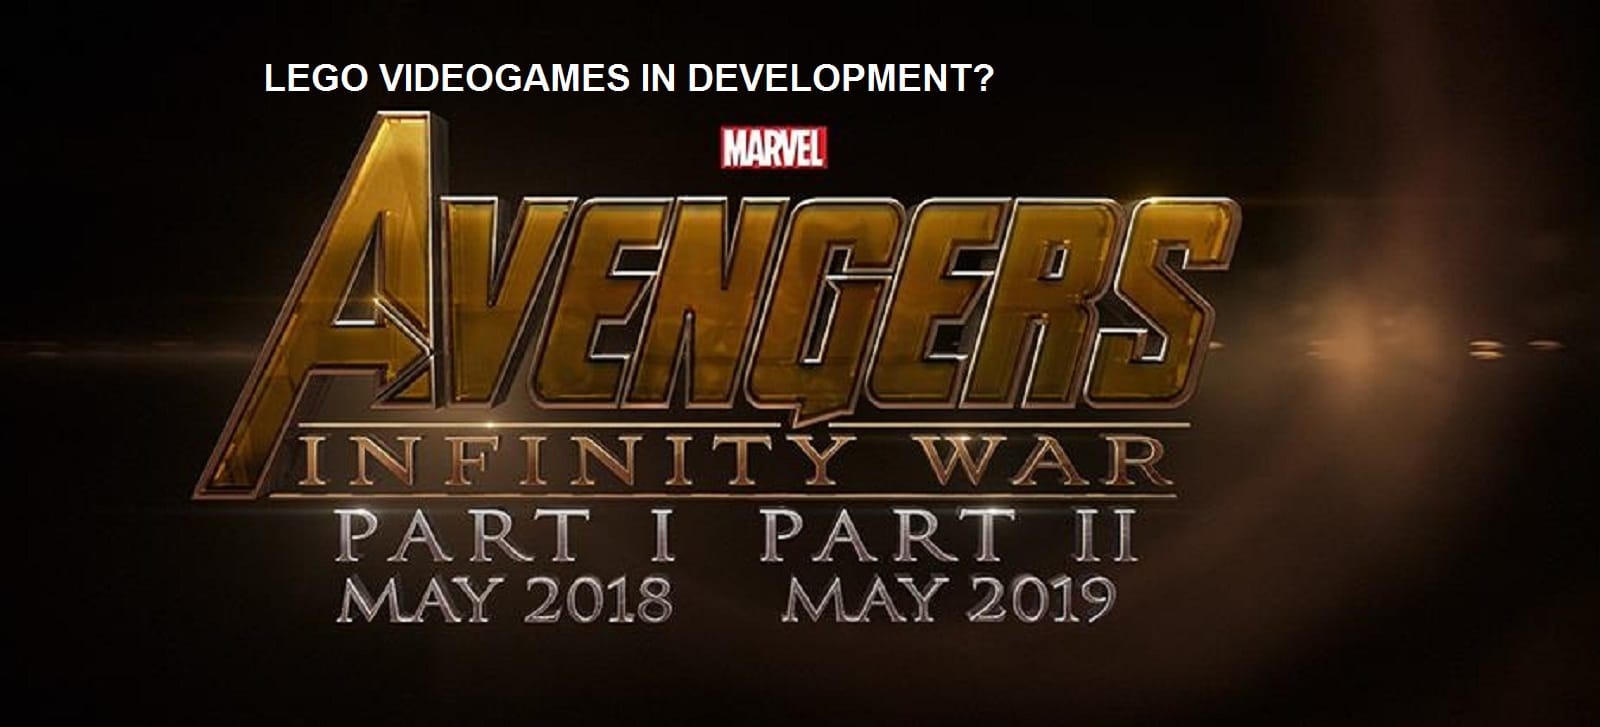 new marvel video games 2019